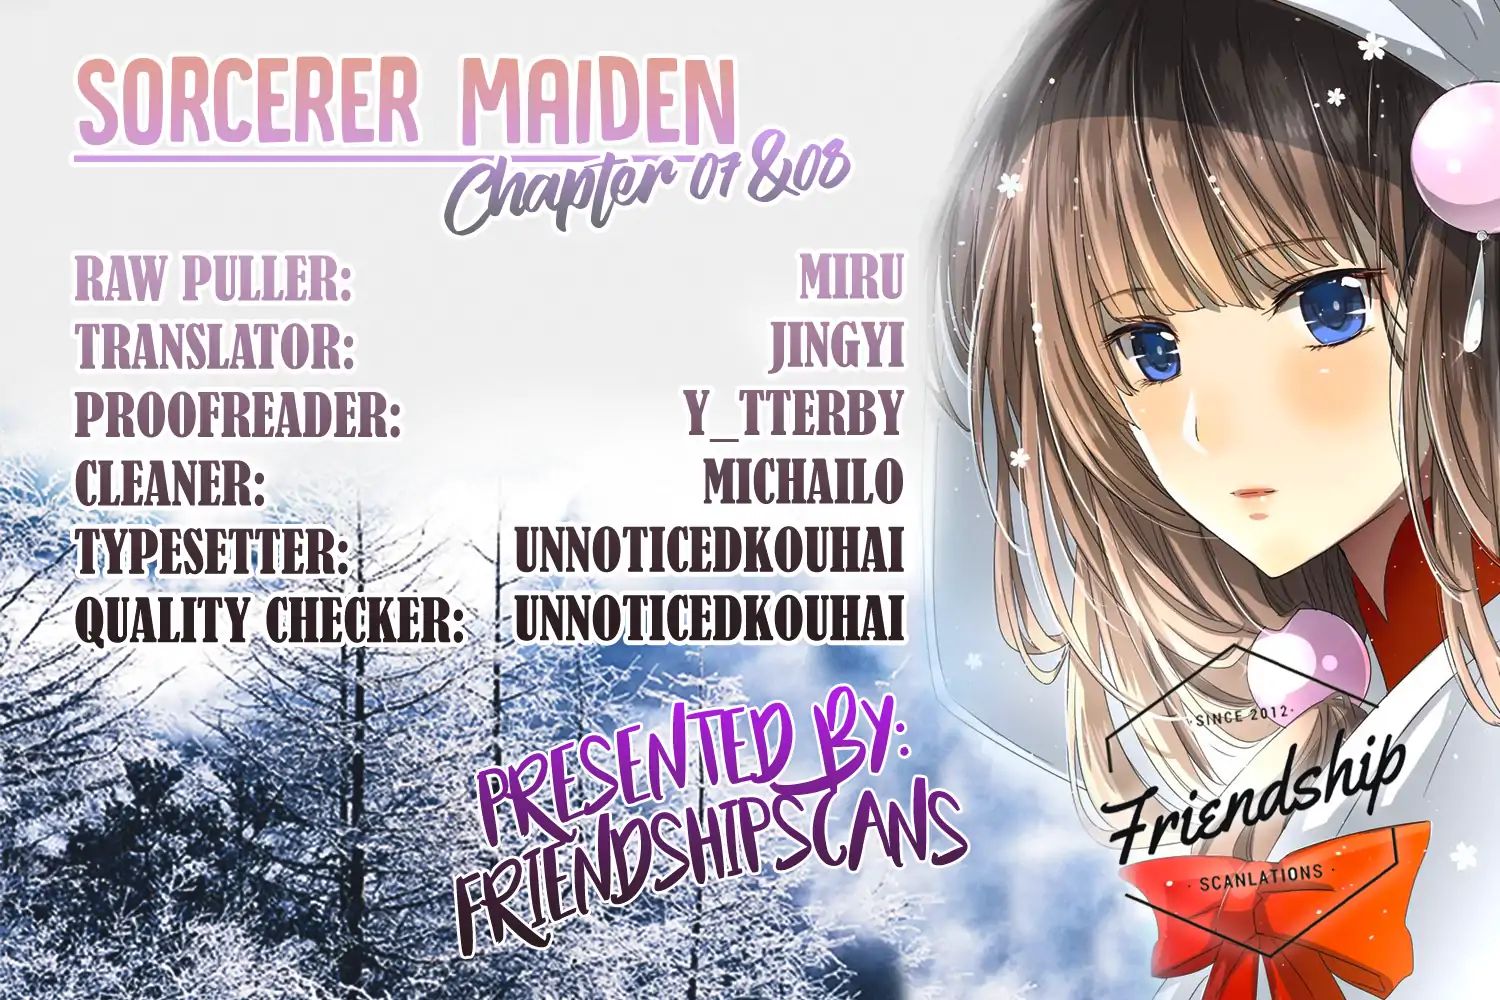 Sorcerer Maiden Chapter 7: Unwanted (Chapter 7 & 8)